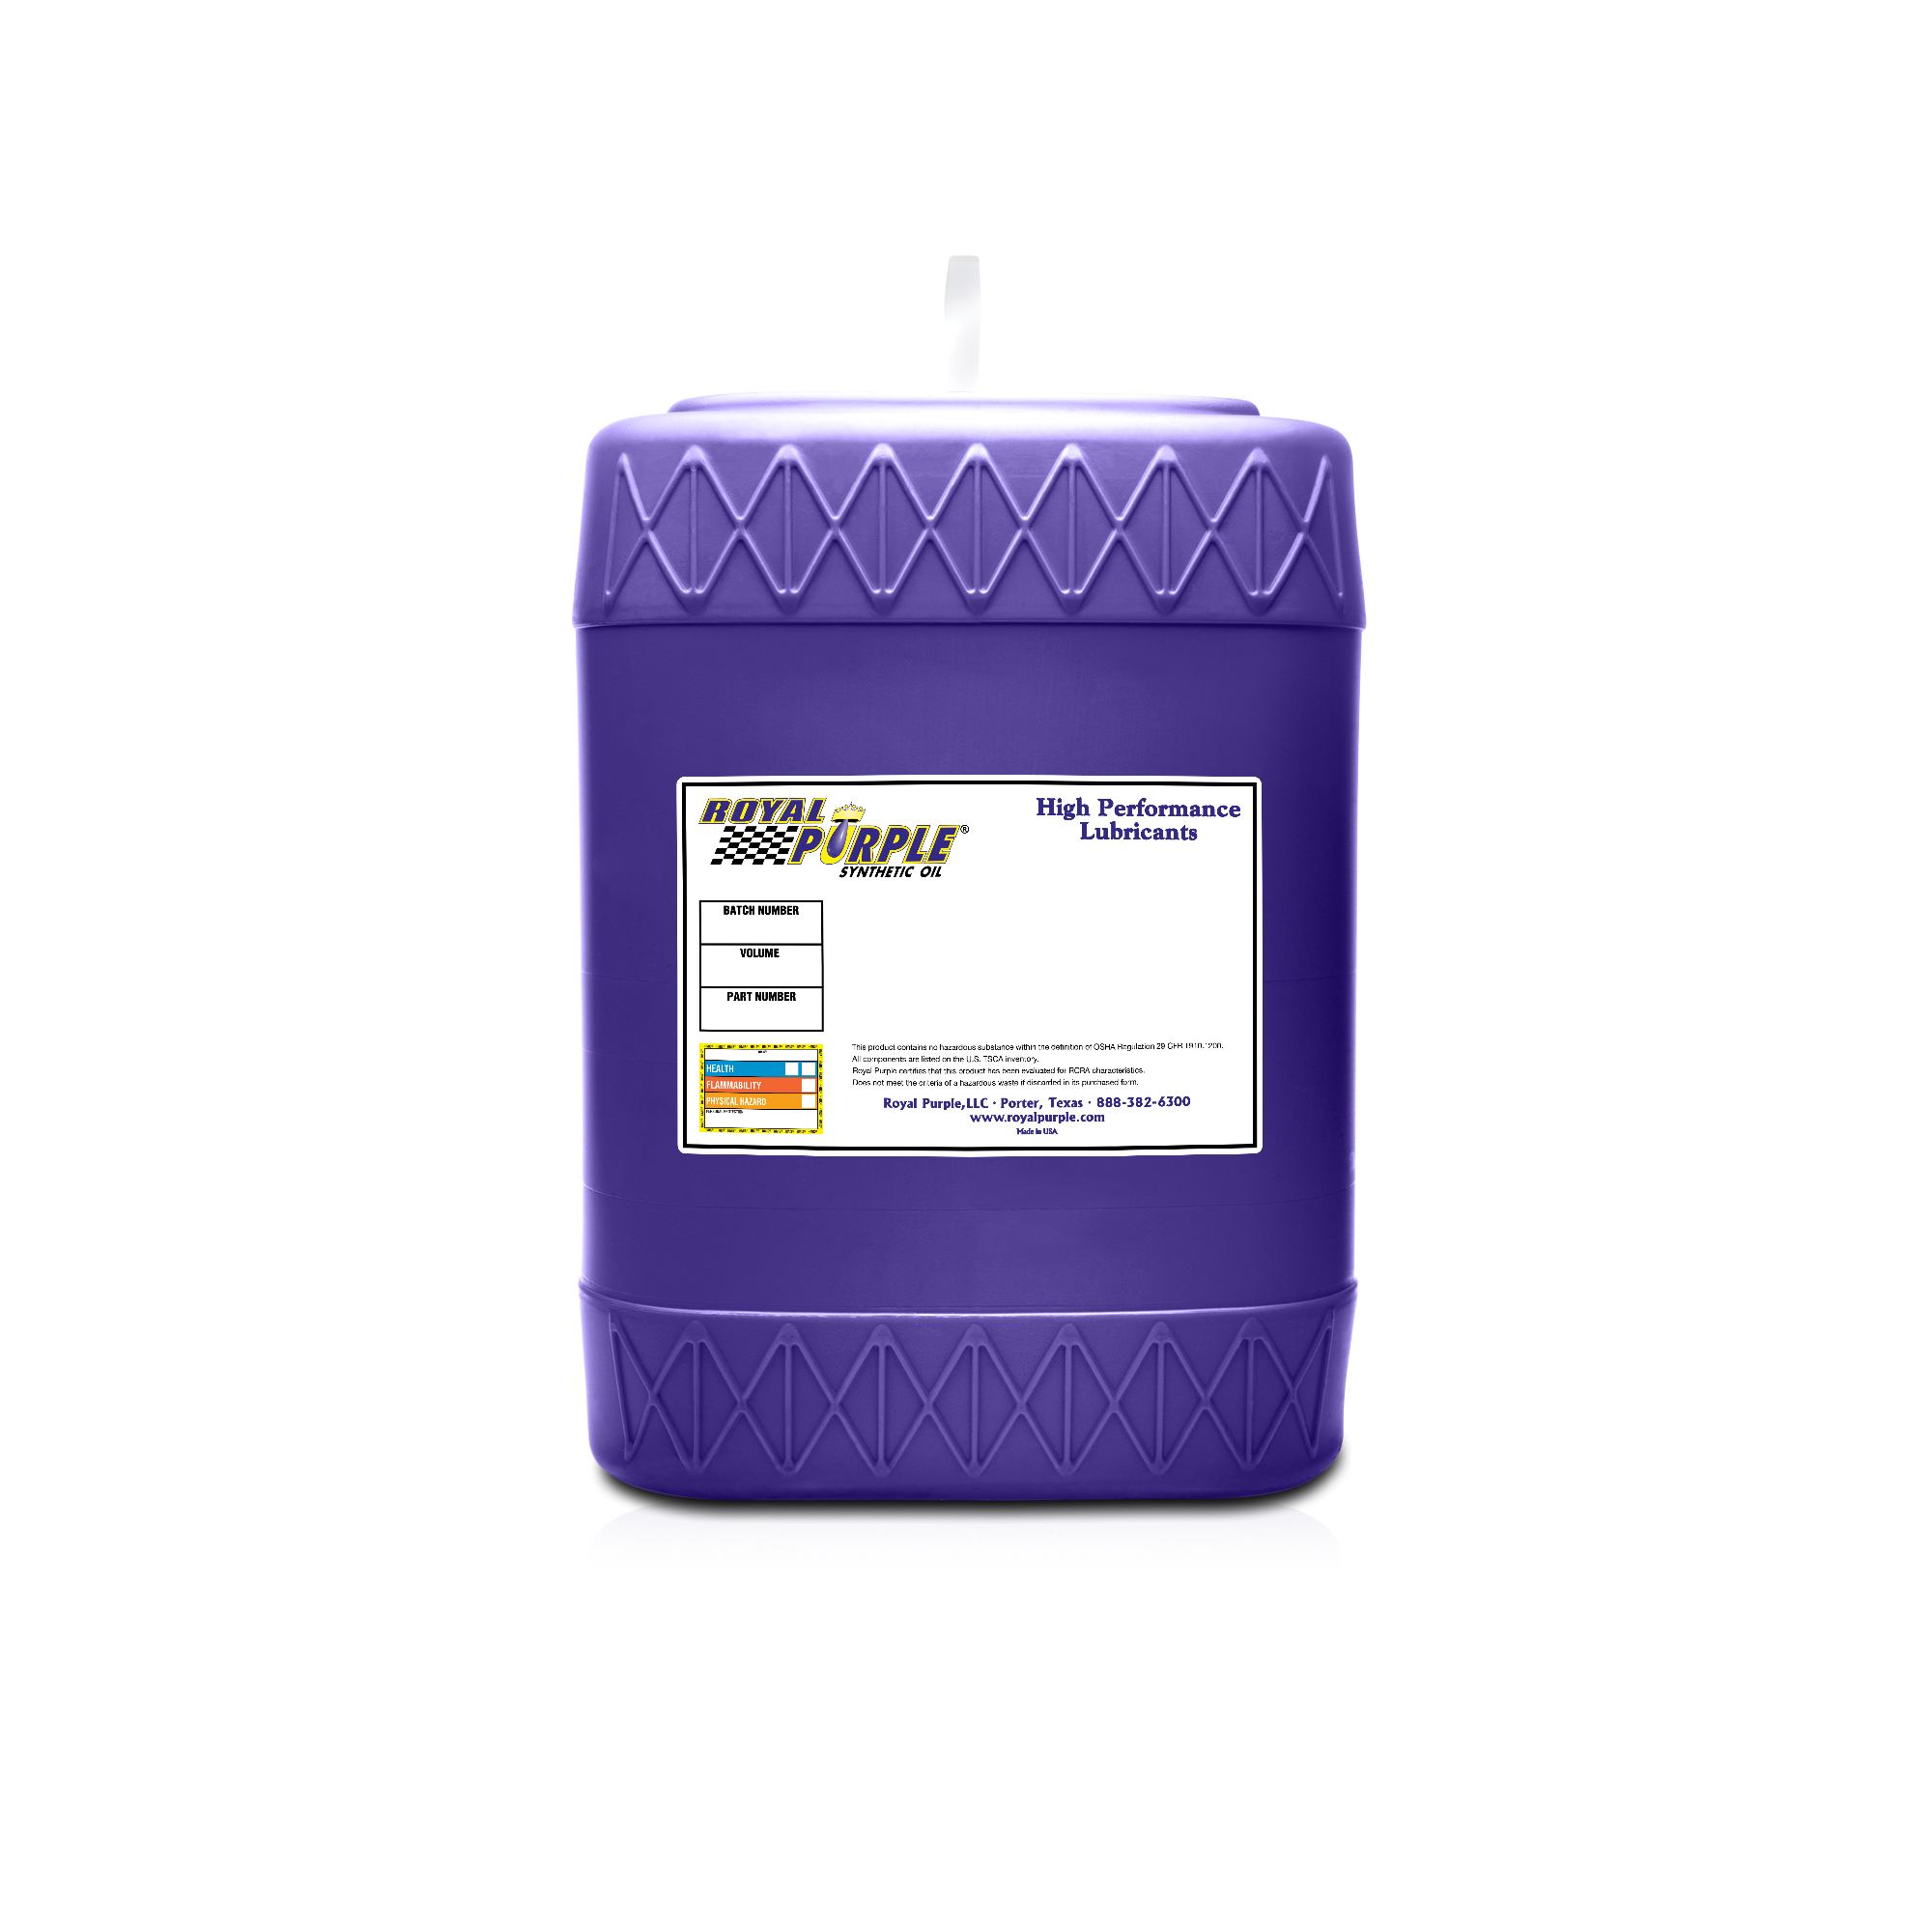 Royal Purple Wire Rope Lubricant 5-Gallon Pail 11377 Image